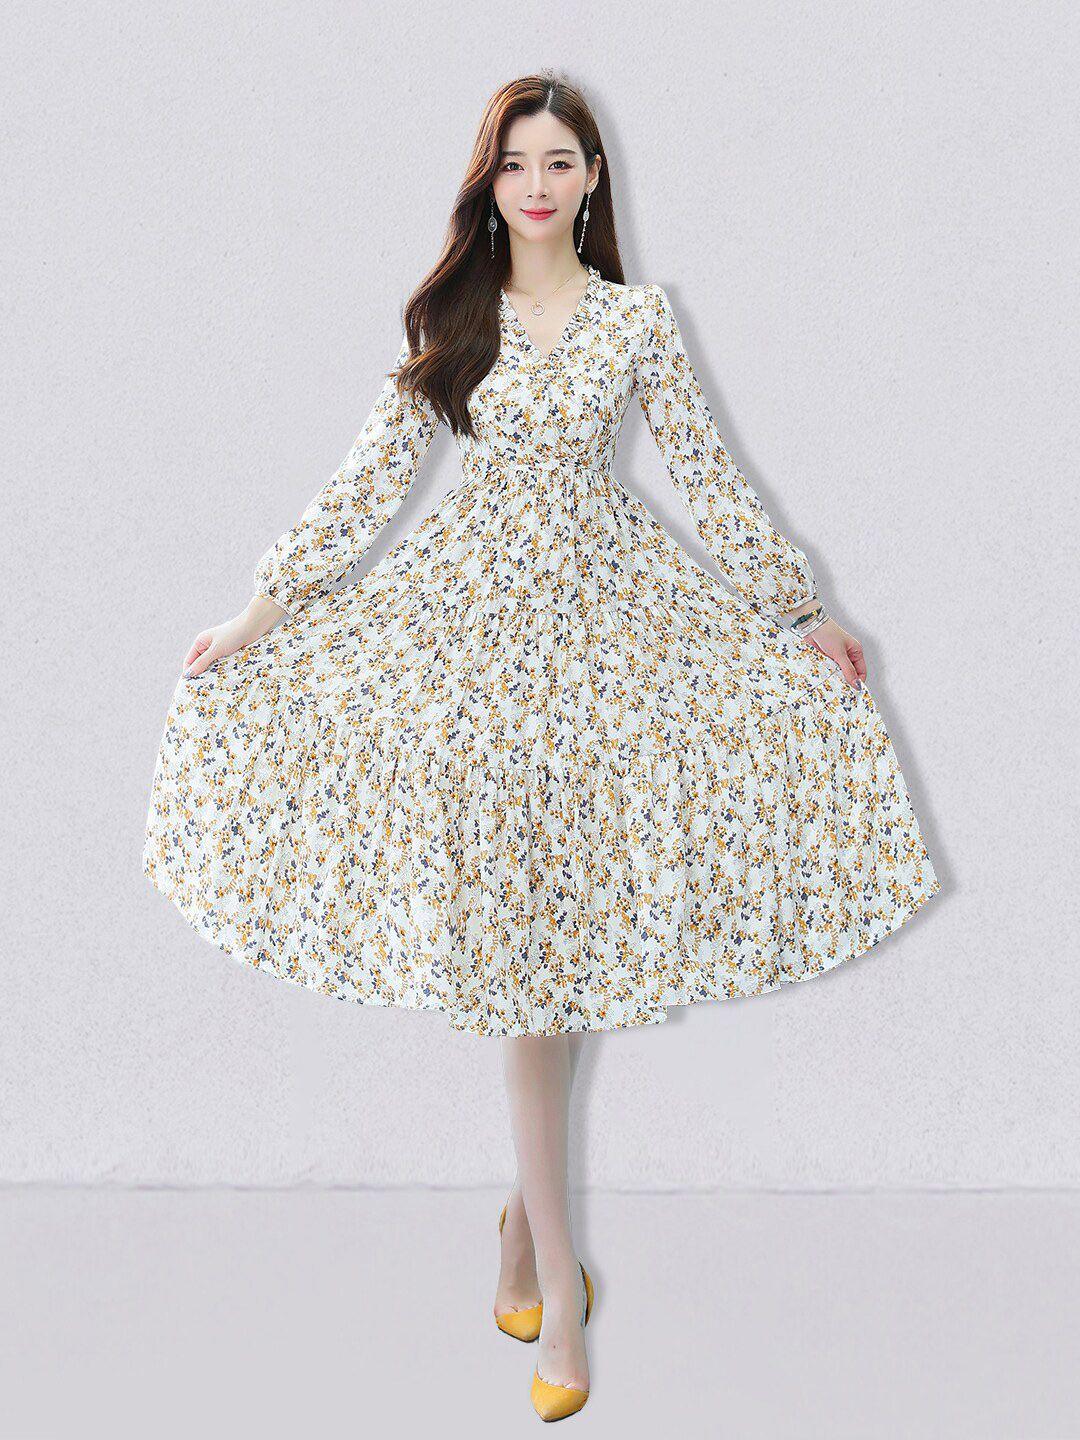 jc-collection-off-white-floral-midi-dress